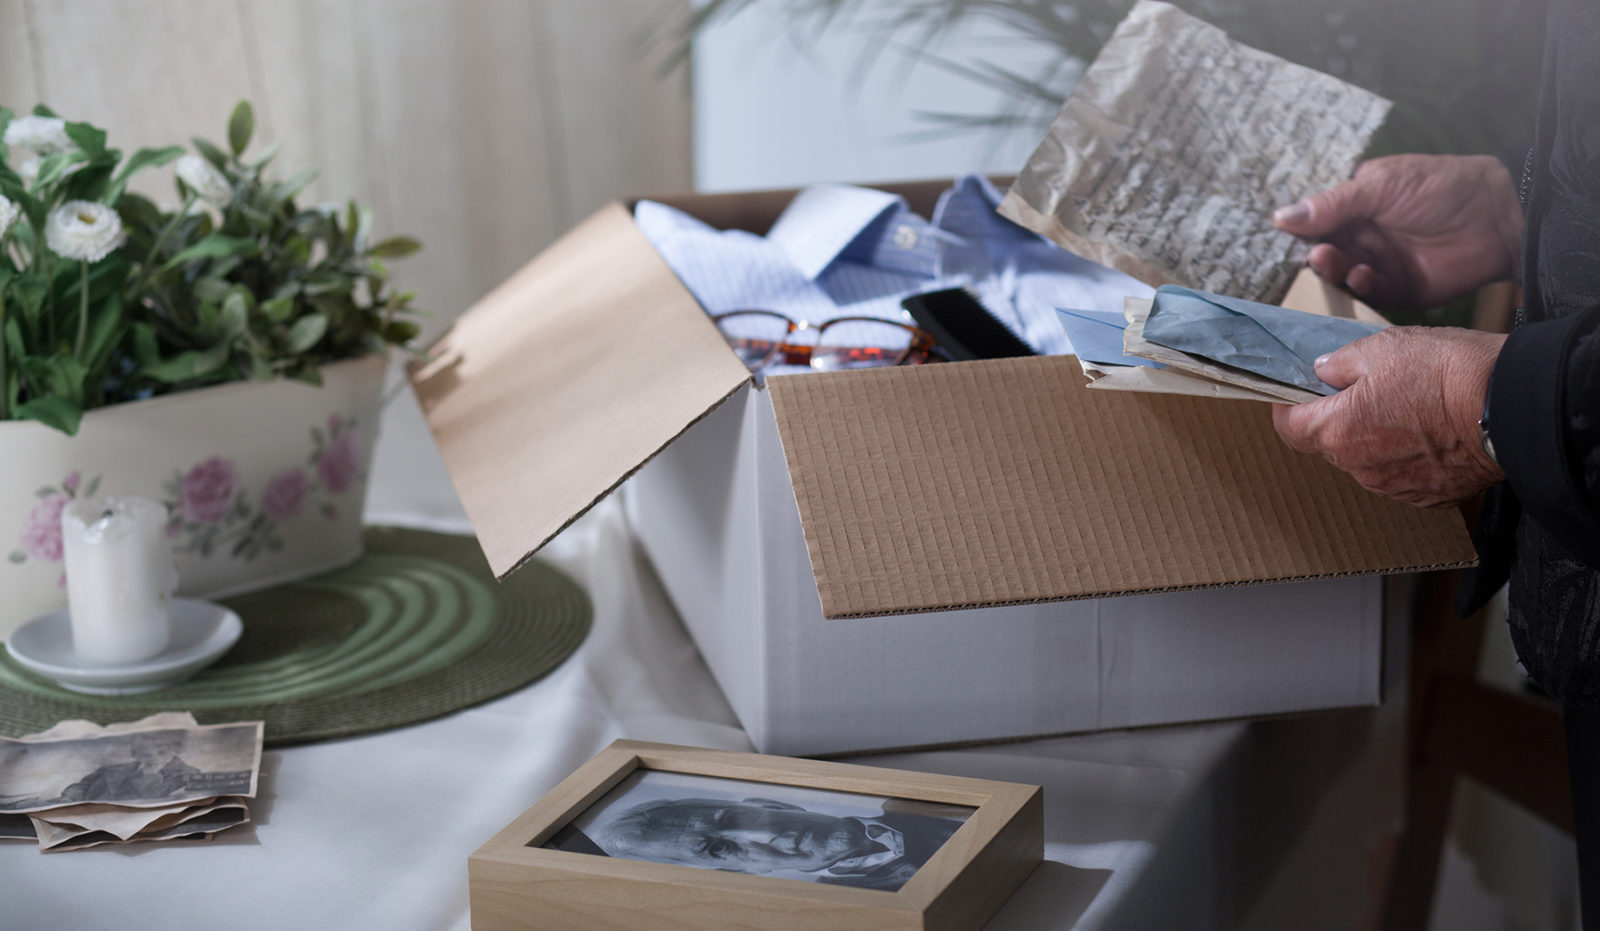 packing remembrances in a cardboard box